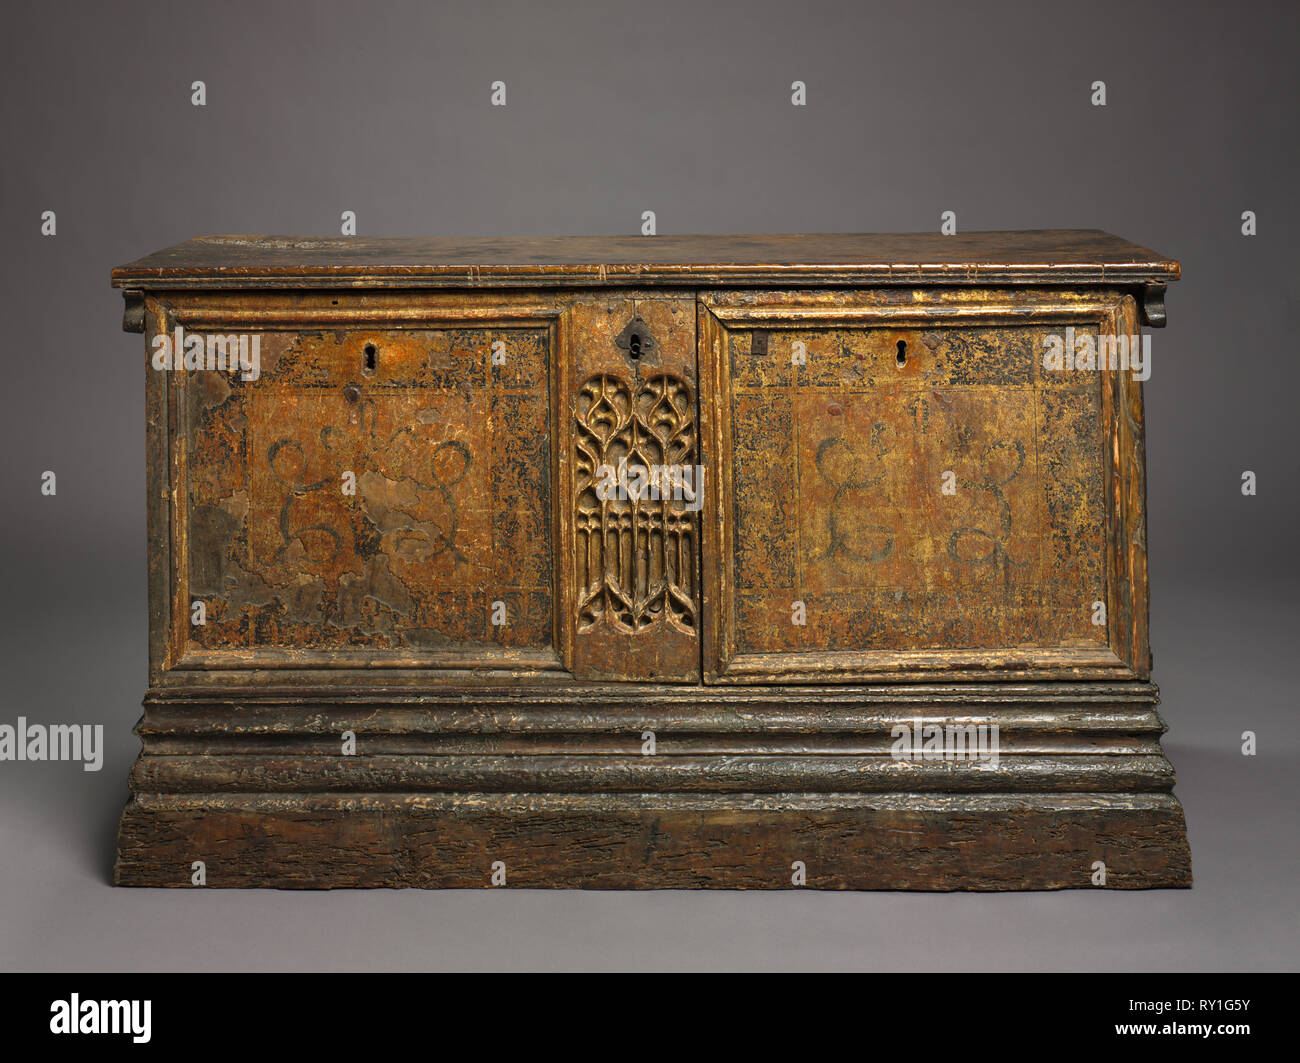 Gothic Marriage Chest, c. 1500. Spain, Catalonia, Barcelona(?), early 16th century. Wood with painting and gilding; overall: 71.8 x 127 x 55.9 cm (28 1/4 x 50 x 22 in Stock Photo